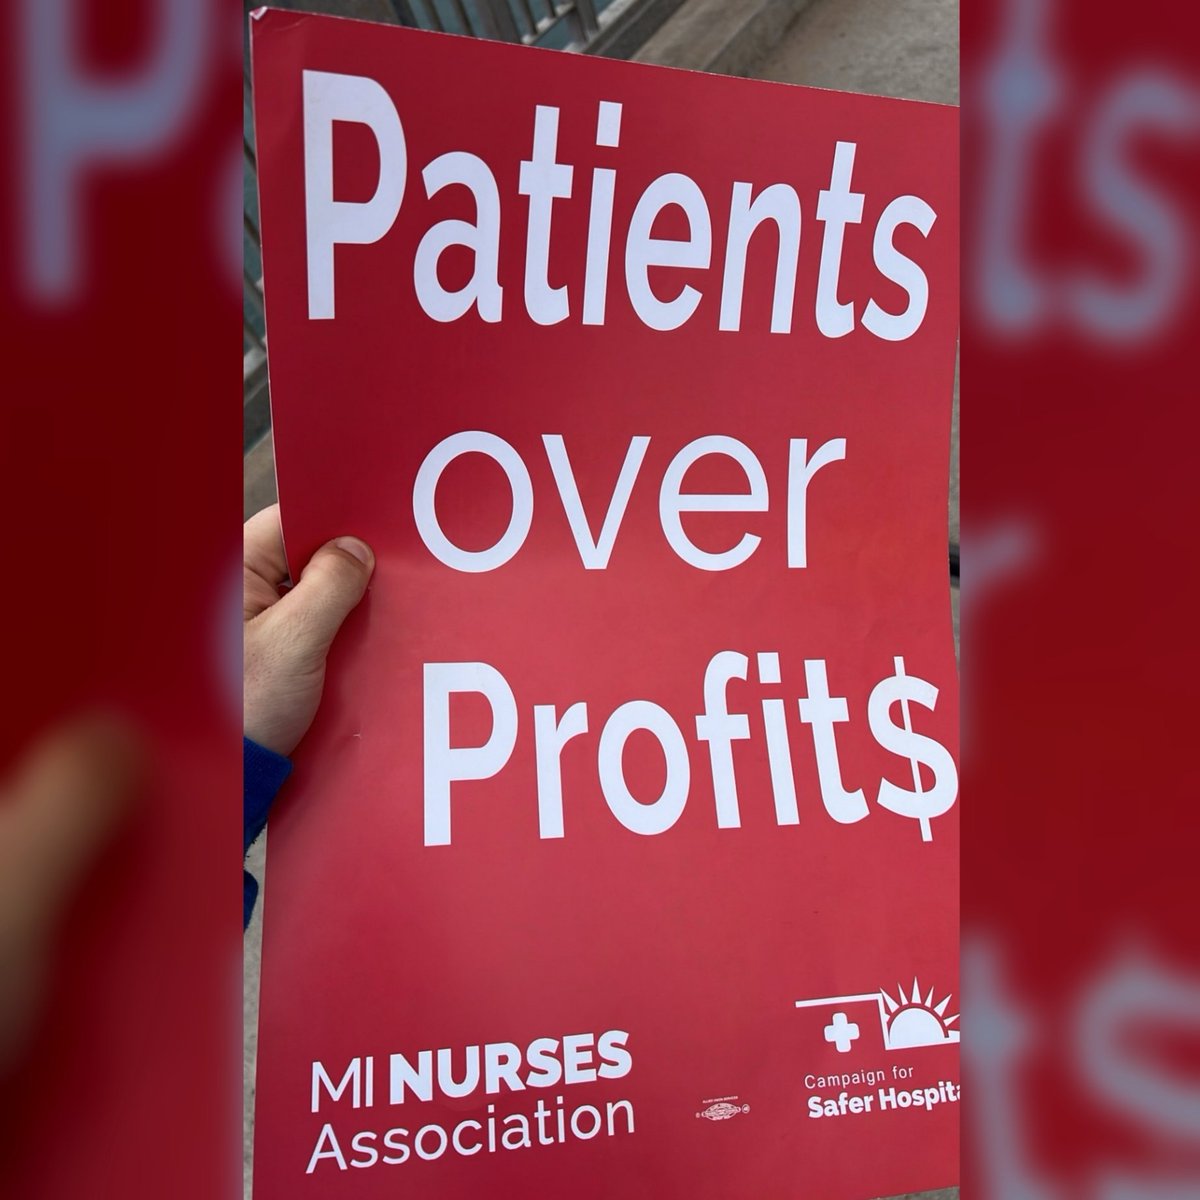 Team Lorinser at the pop up rally for striking nurses in the Soo. Michigan Nurses deserve fair pay, safe working conditions and safe staffing levels. #SaveOurSoo #MI01